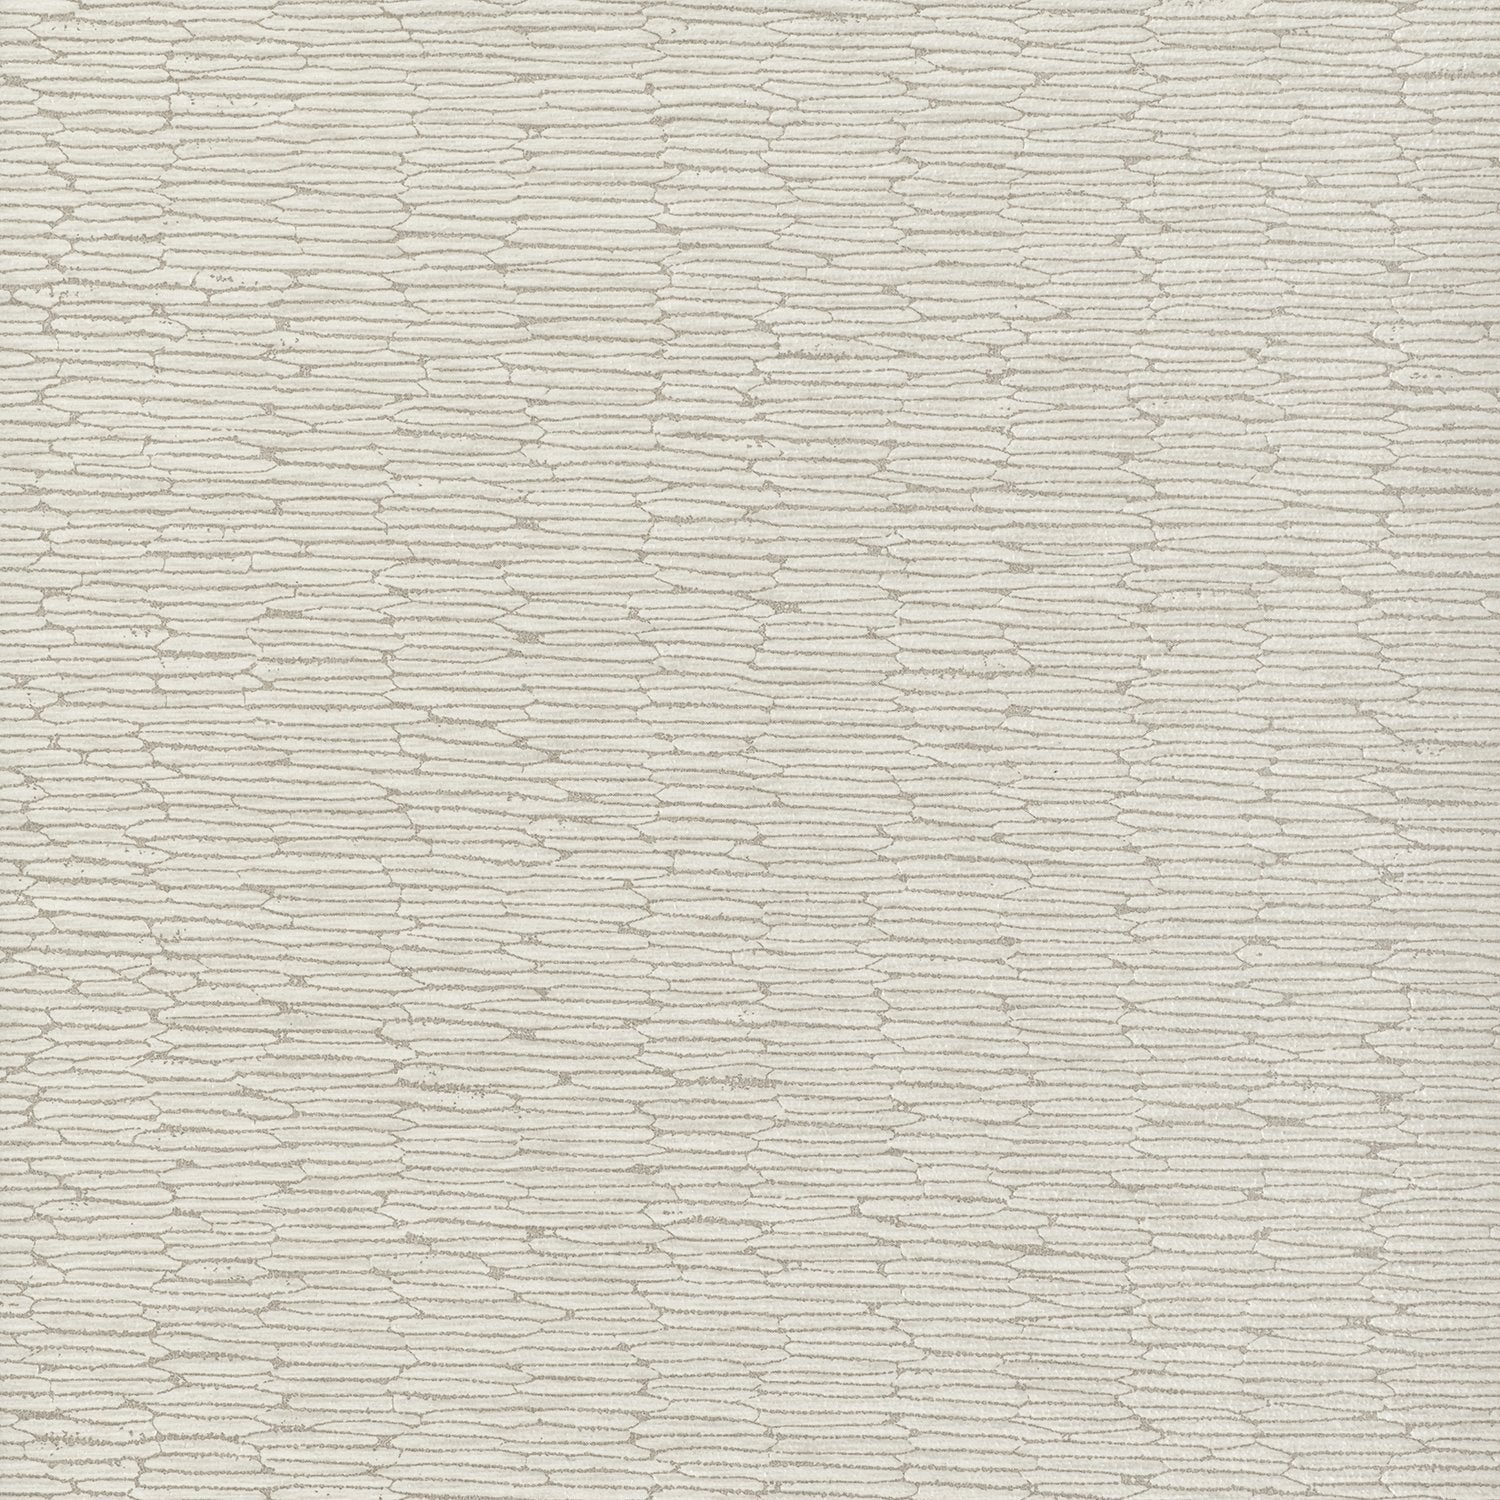 Chipper - Y46862 - Wallcovering - Vycon - Kube Contract